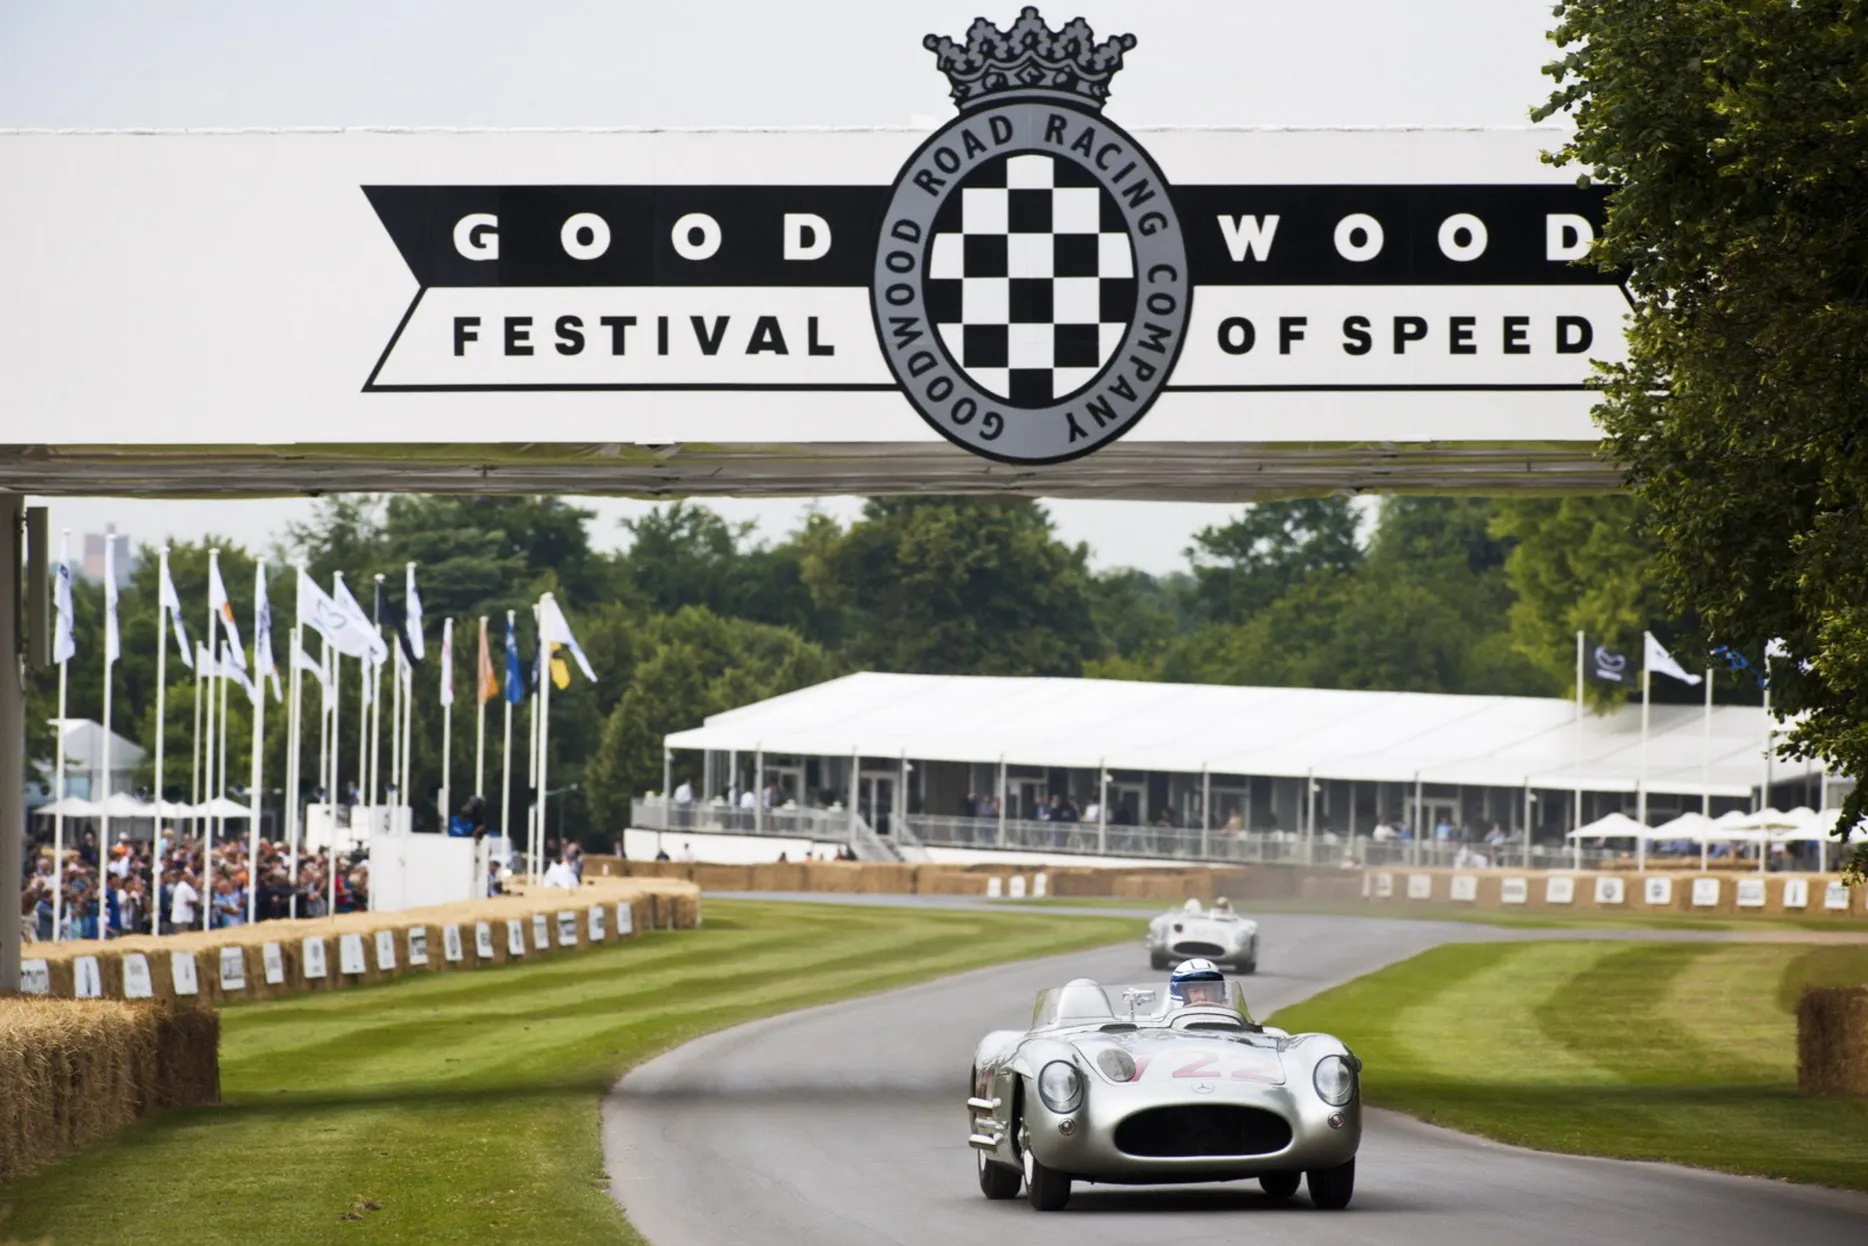 A car passes under the Goodwood Festival of Speed Sign